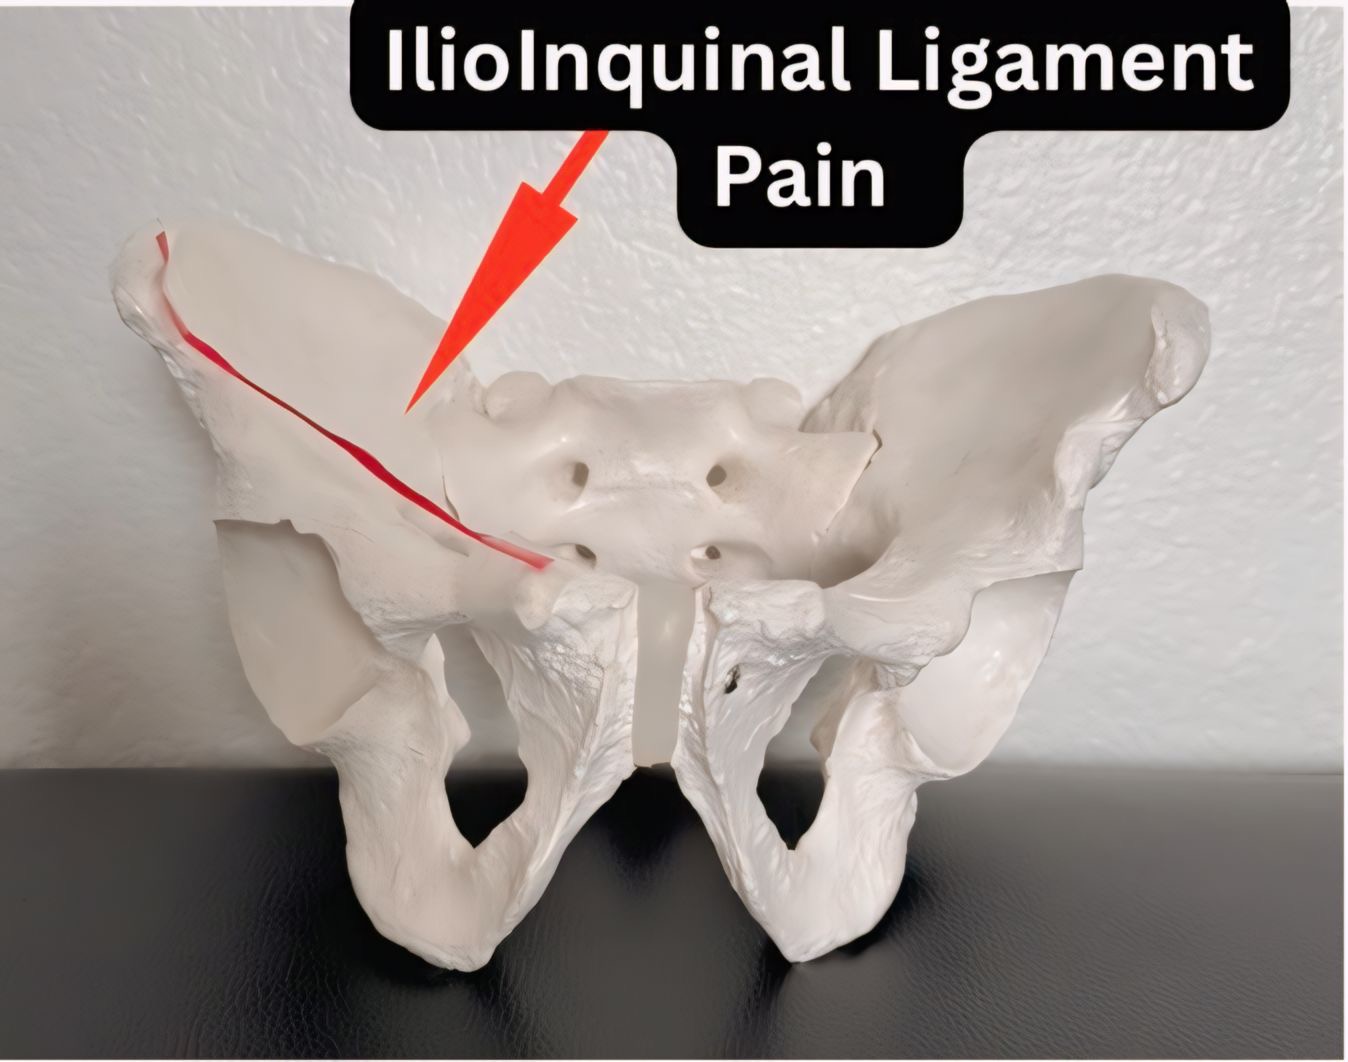 A model depicting the location of the ilioinquinal ligament